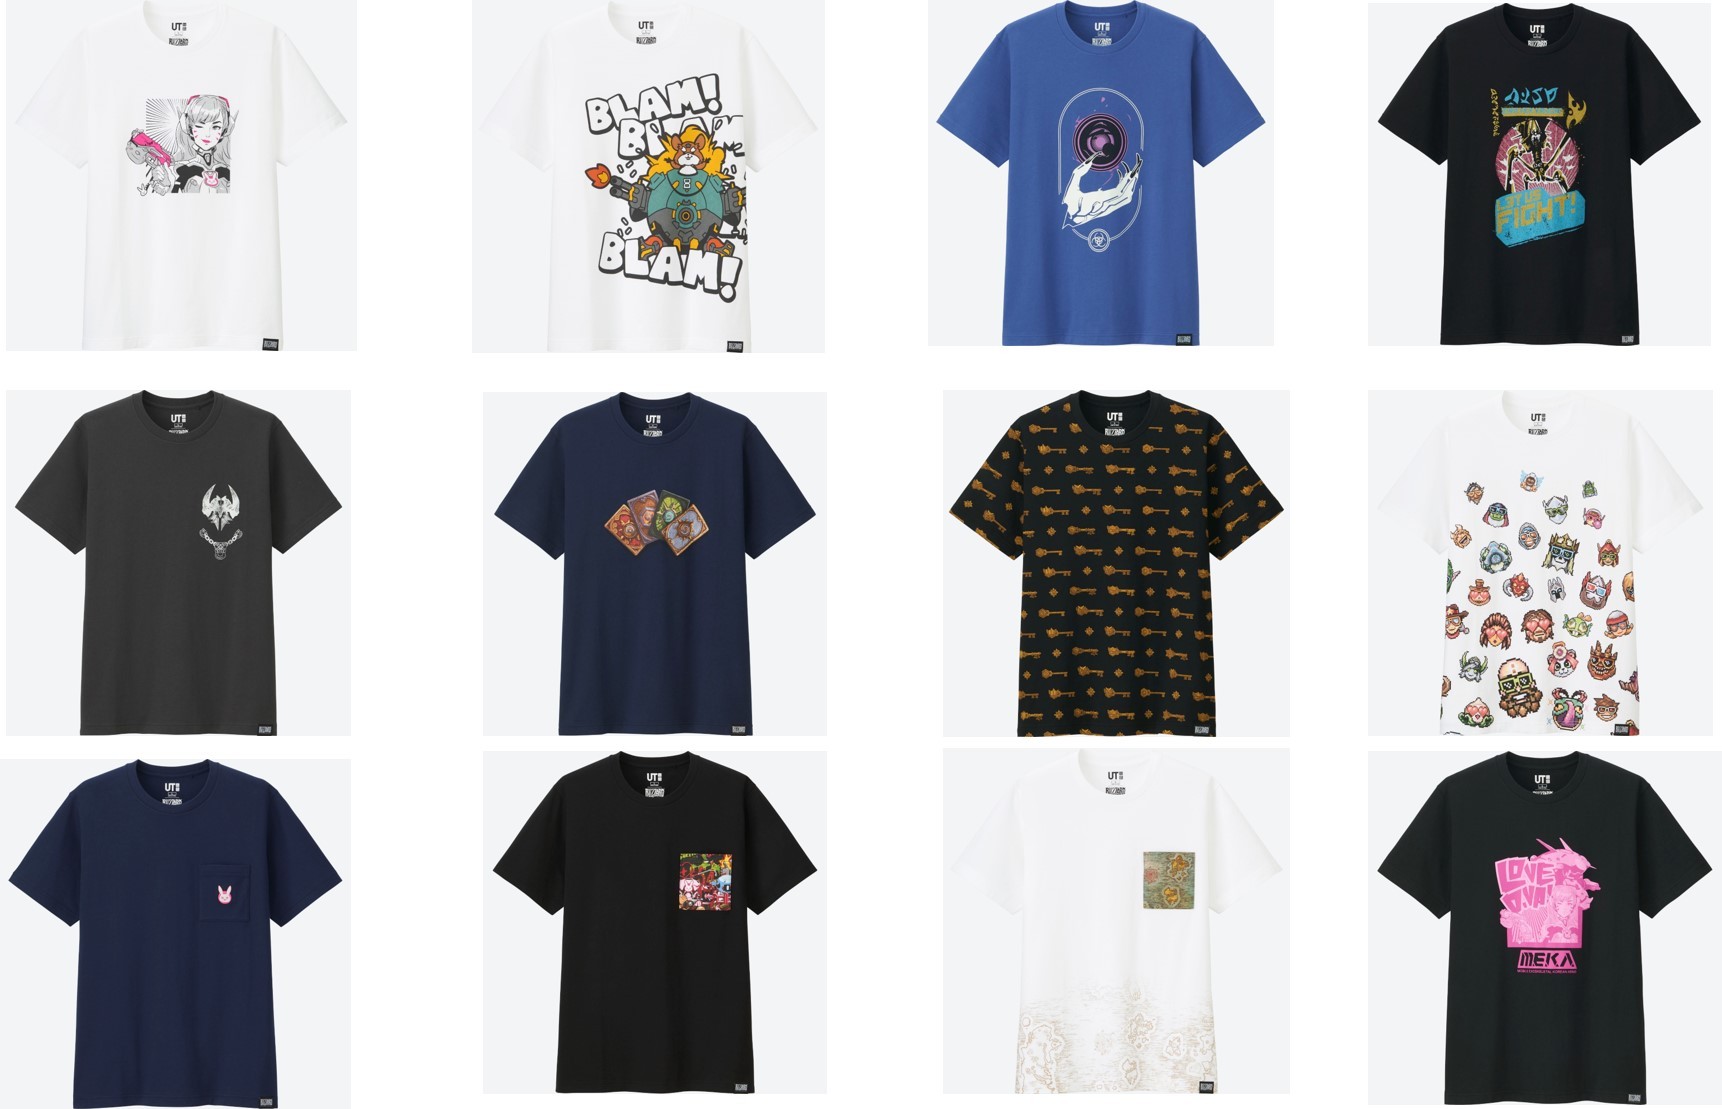 UNIQLO UT Line of Blizzard T-Shirts Launches Today | Business Wire